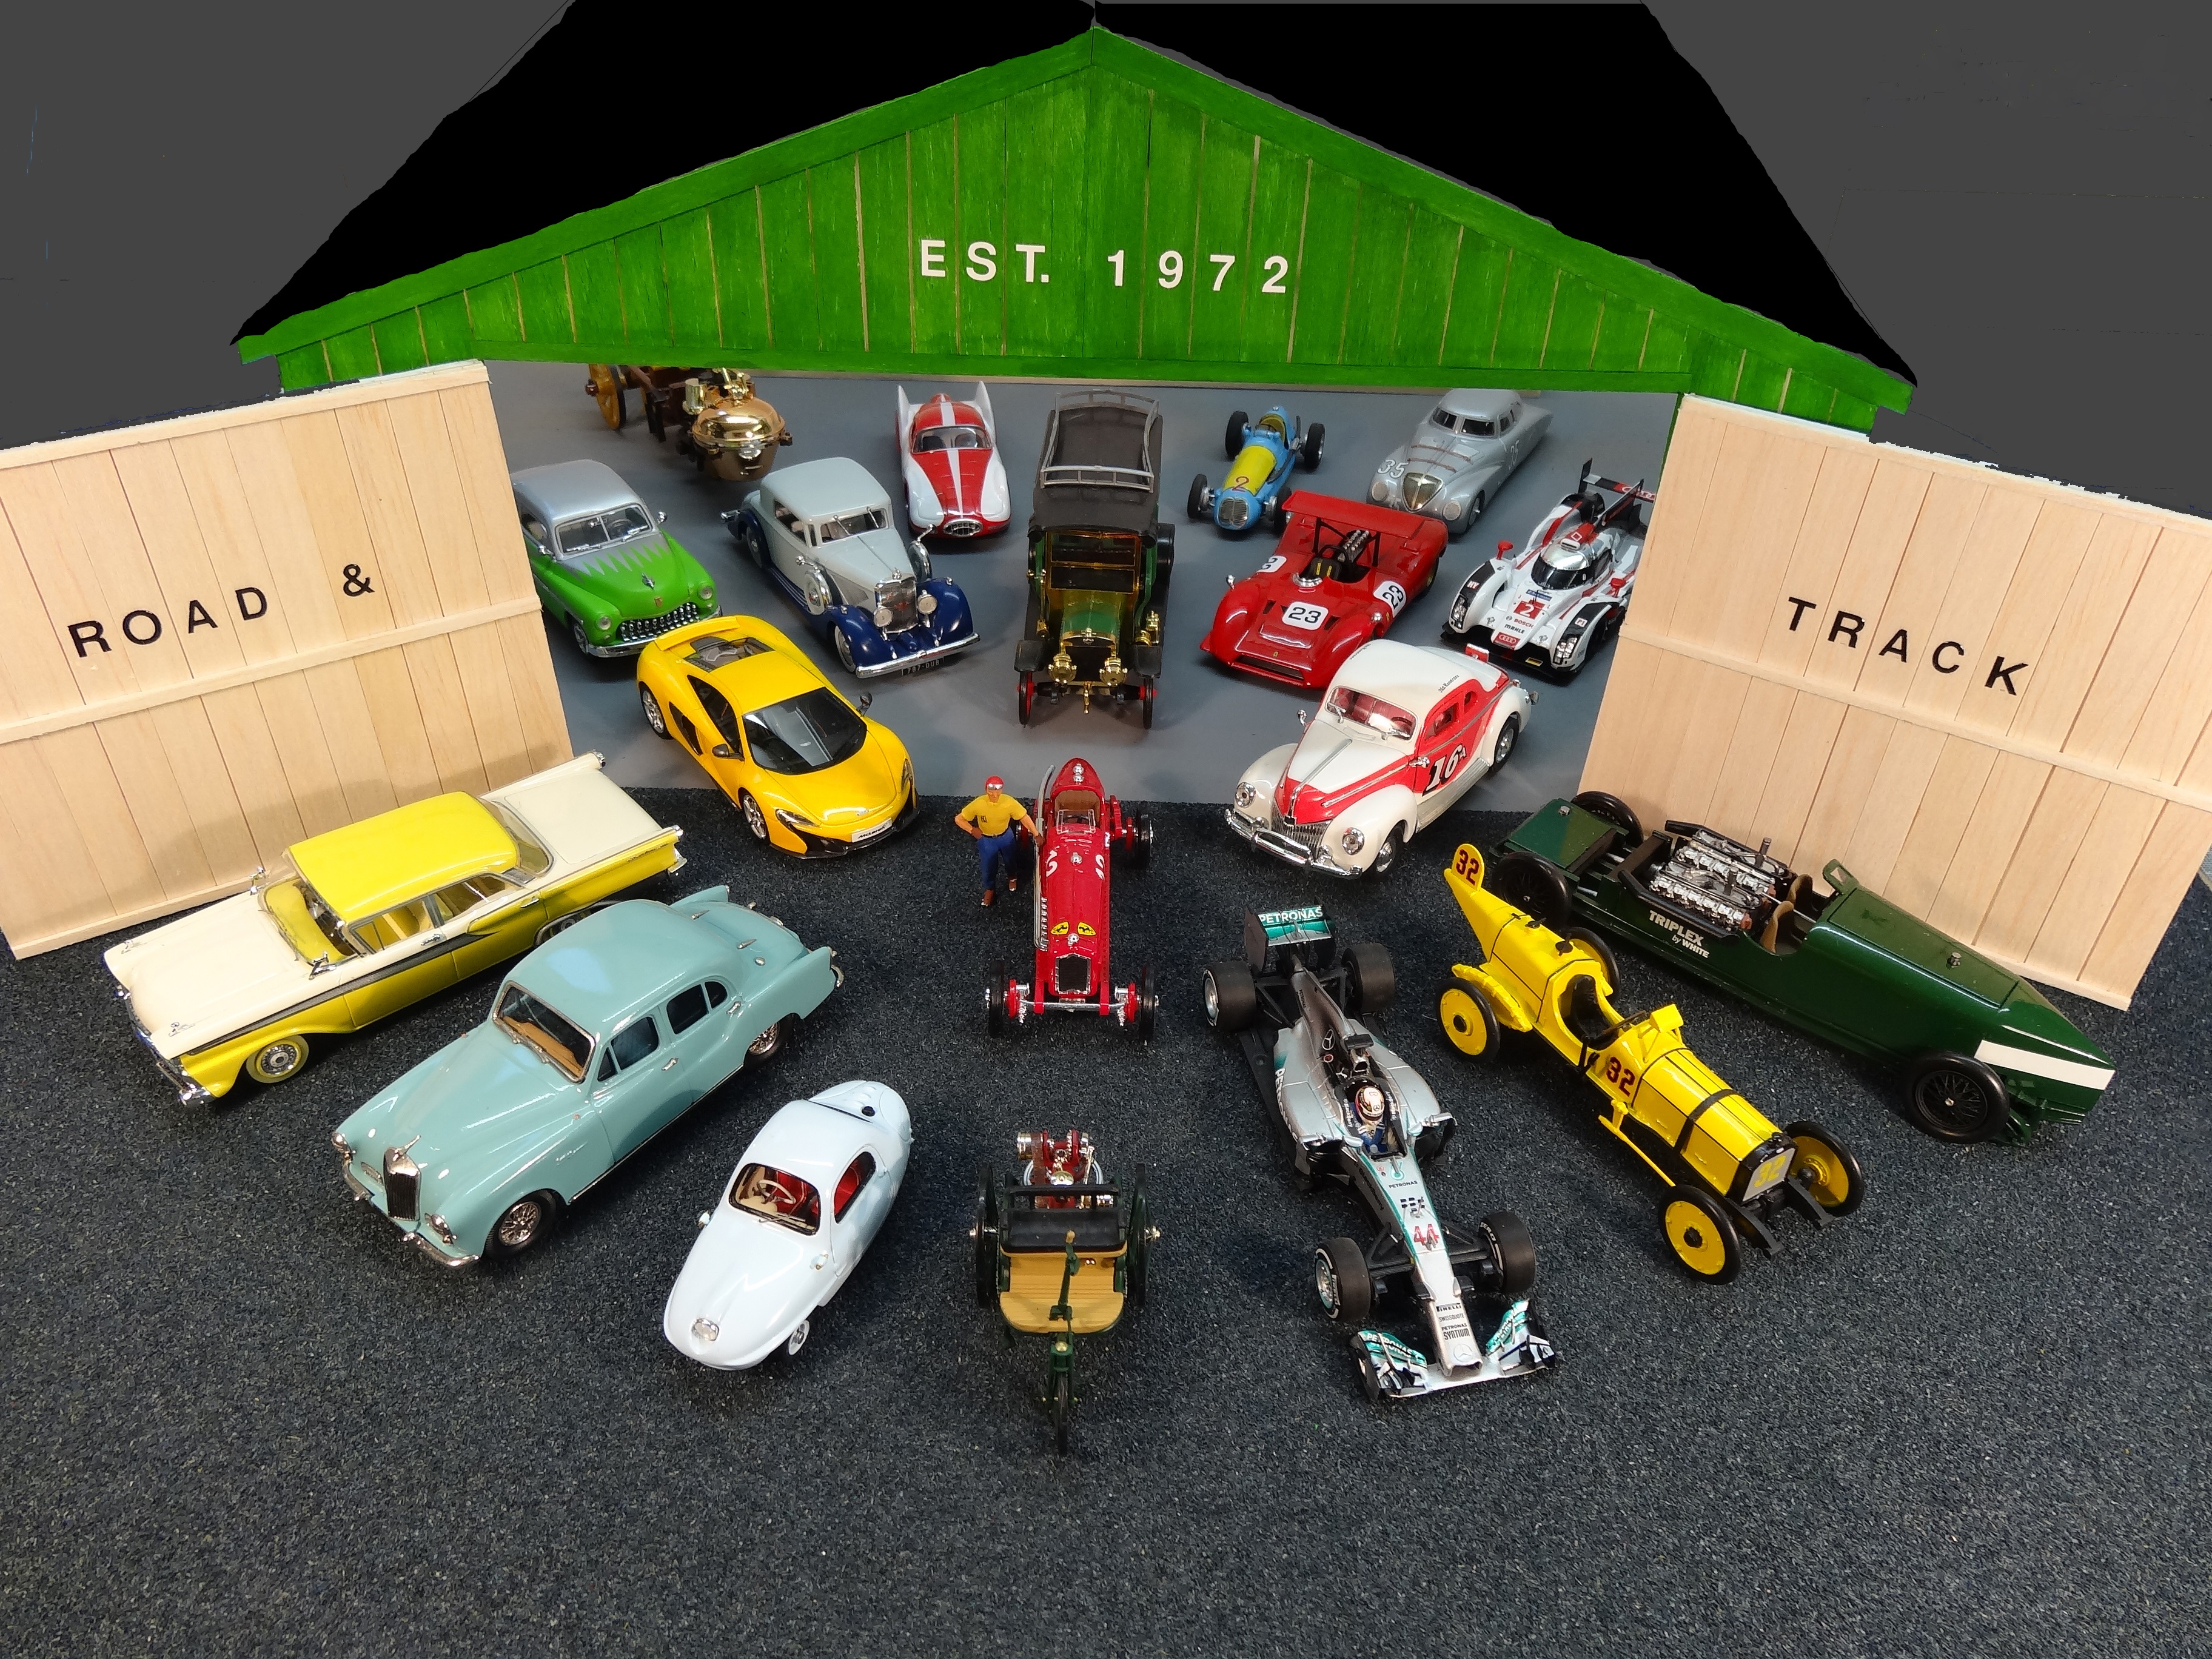 TOGMAC - Collection of Model Cars - Part 2